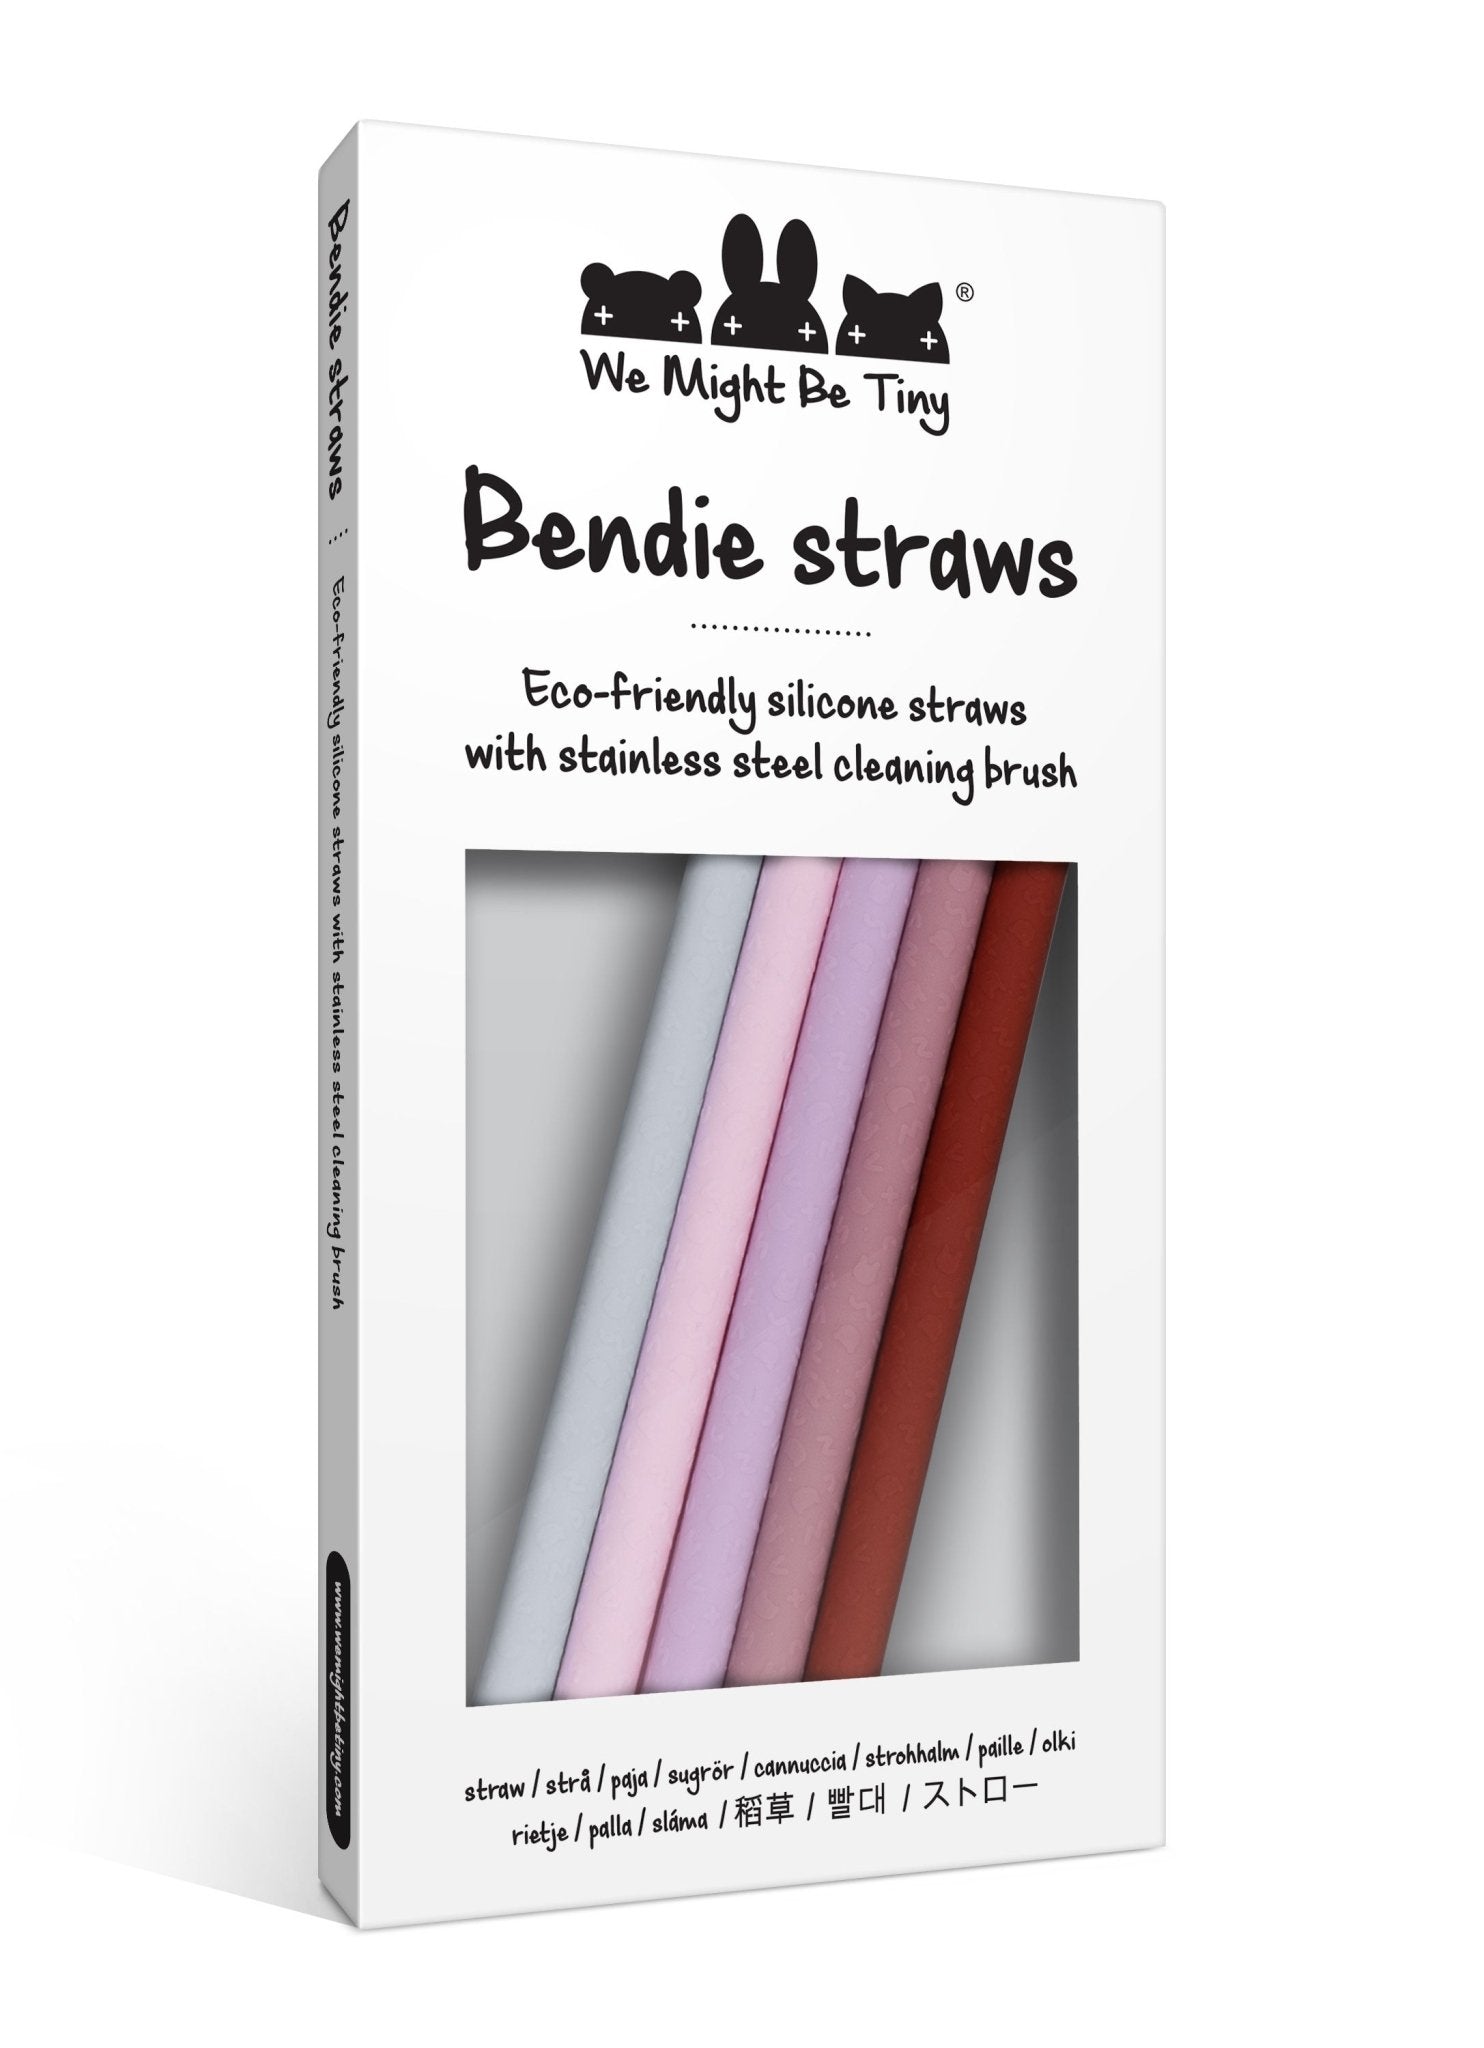 Packaged Silicone Bendie Straws in Earth & Blooms